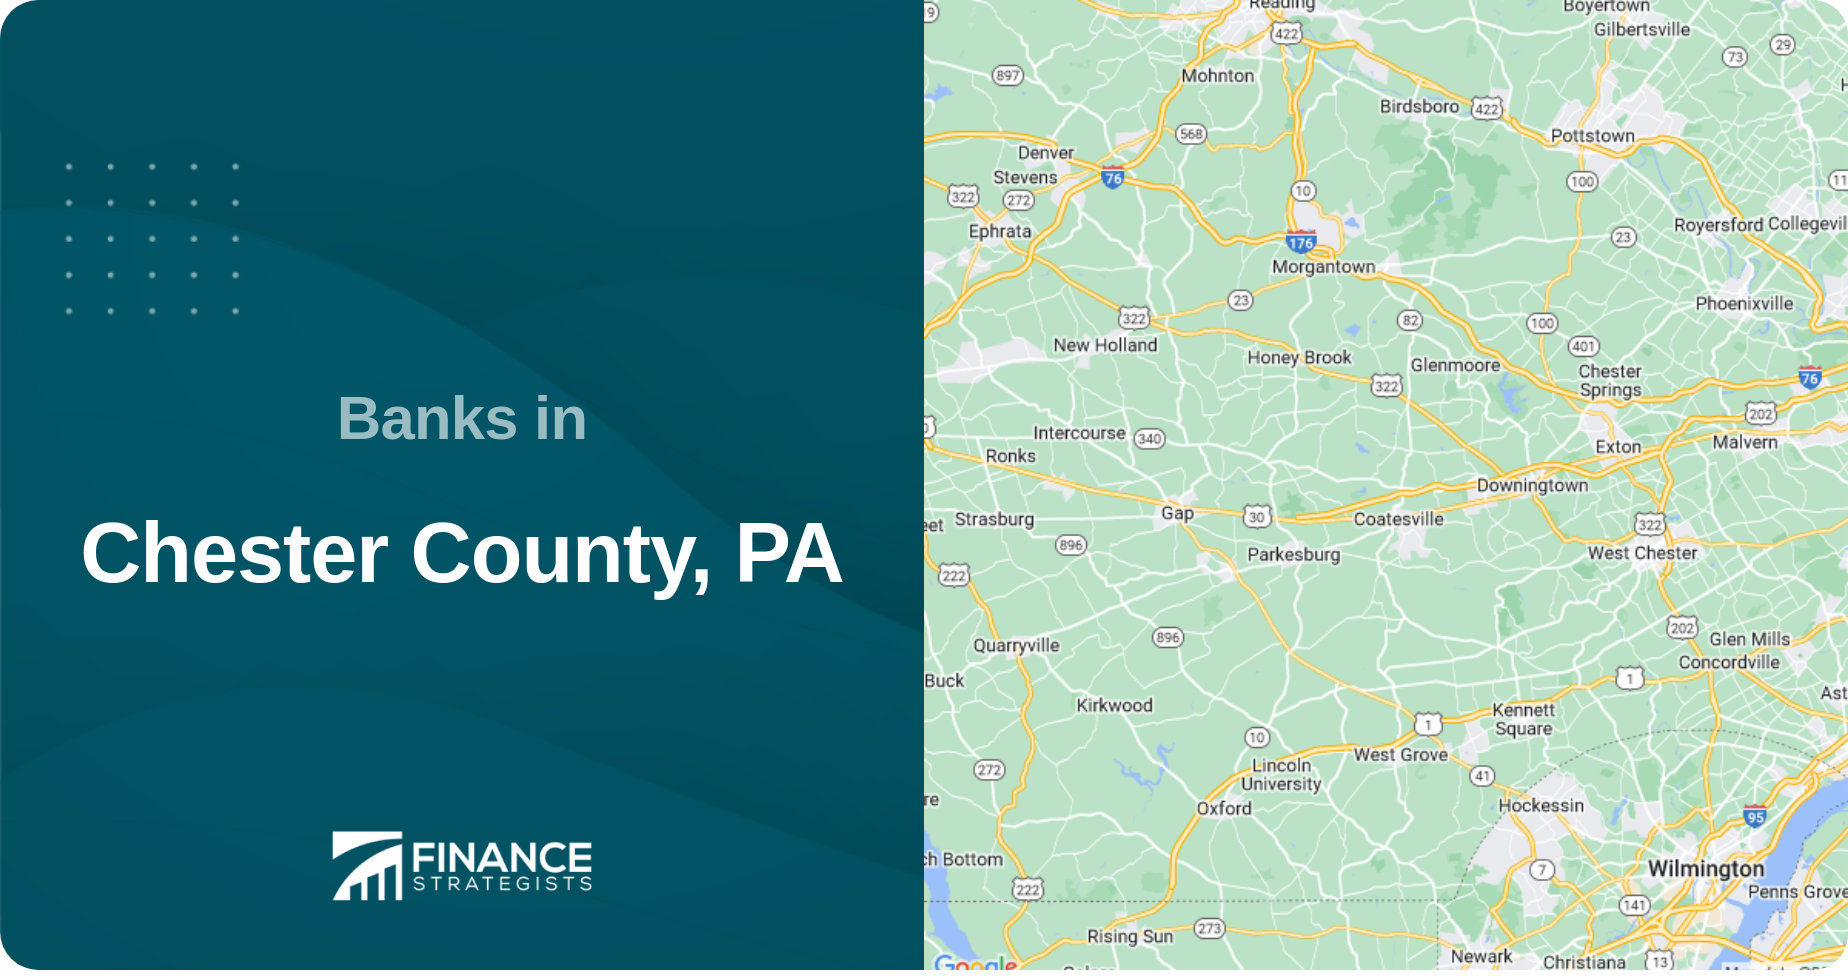 Banks in Chester County, PA